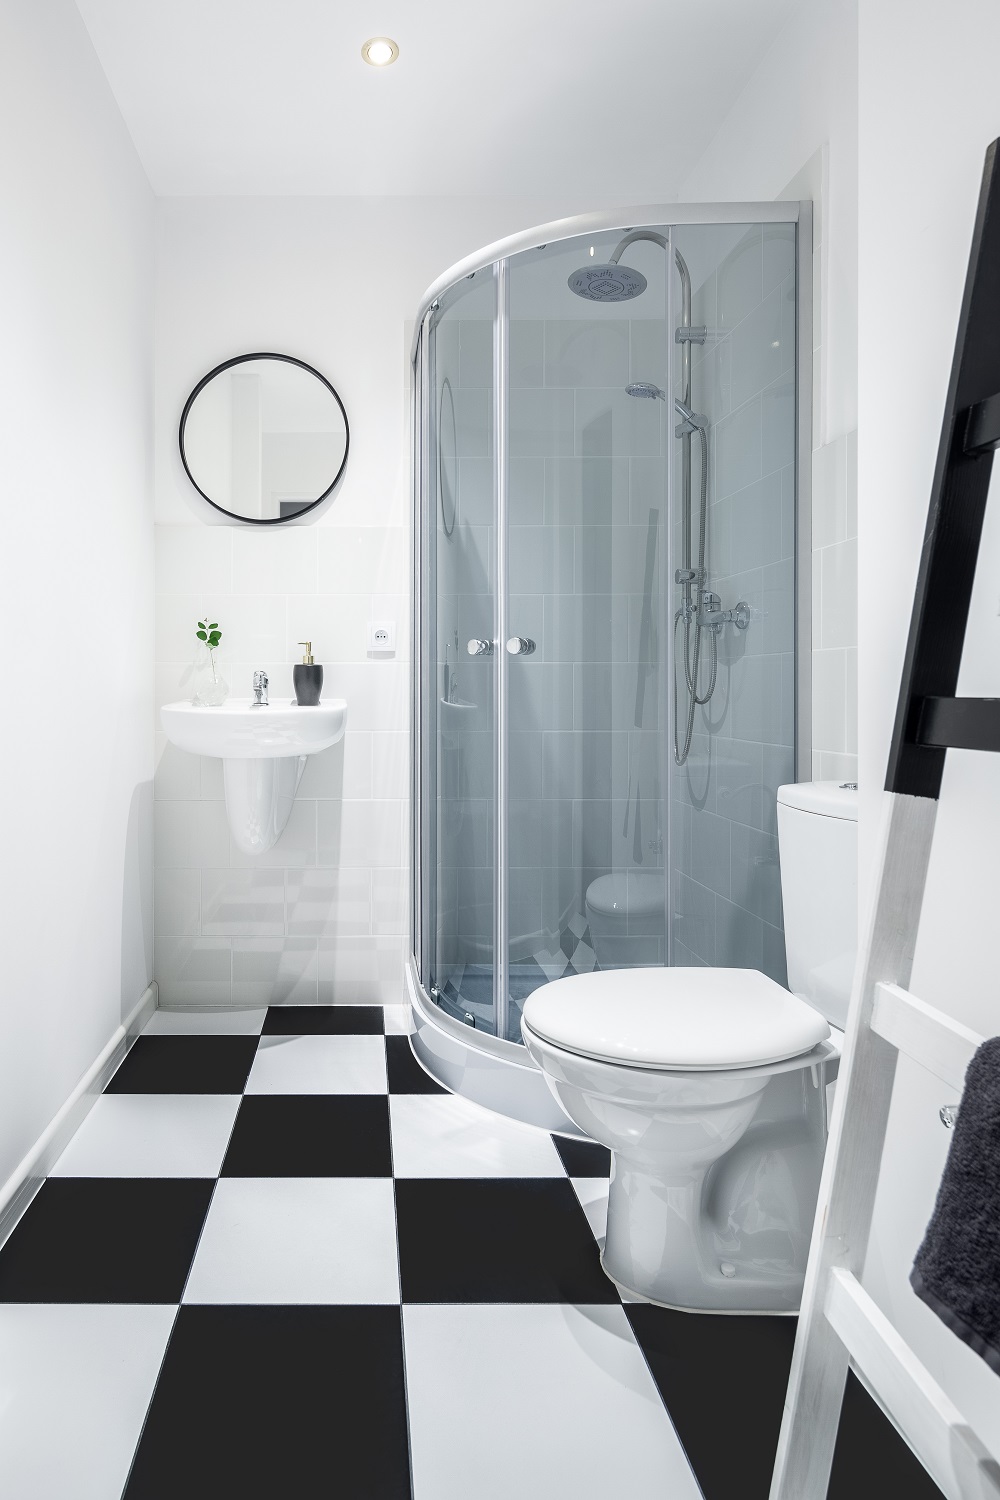 Digital lifestyle image of a small bathroom with black and white chequerboard floor tiles